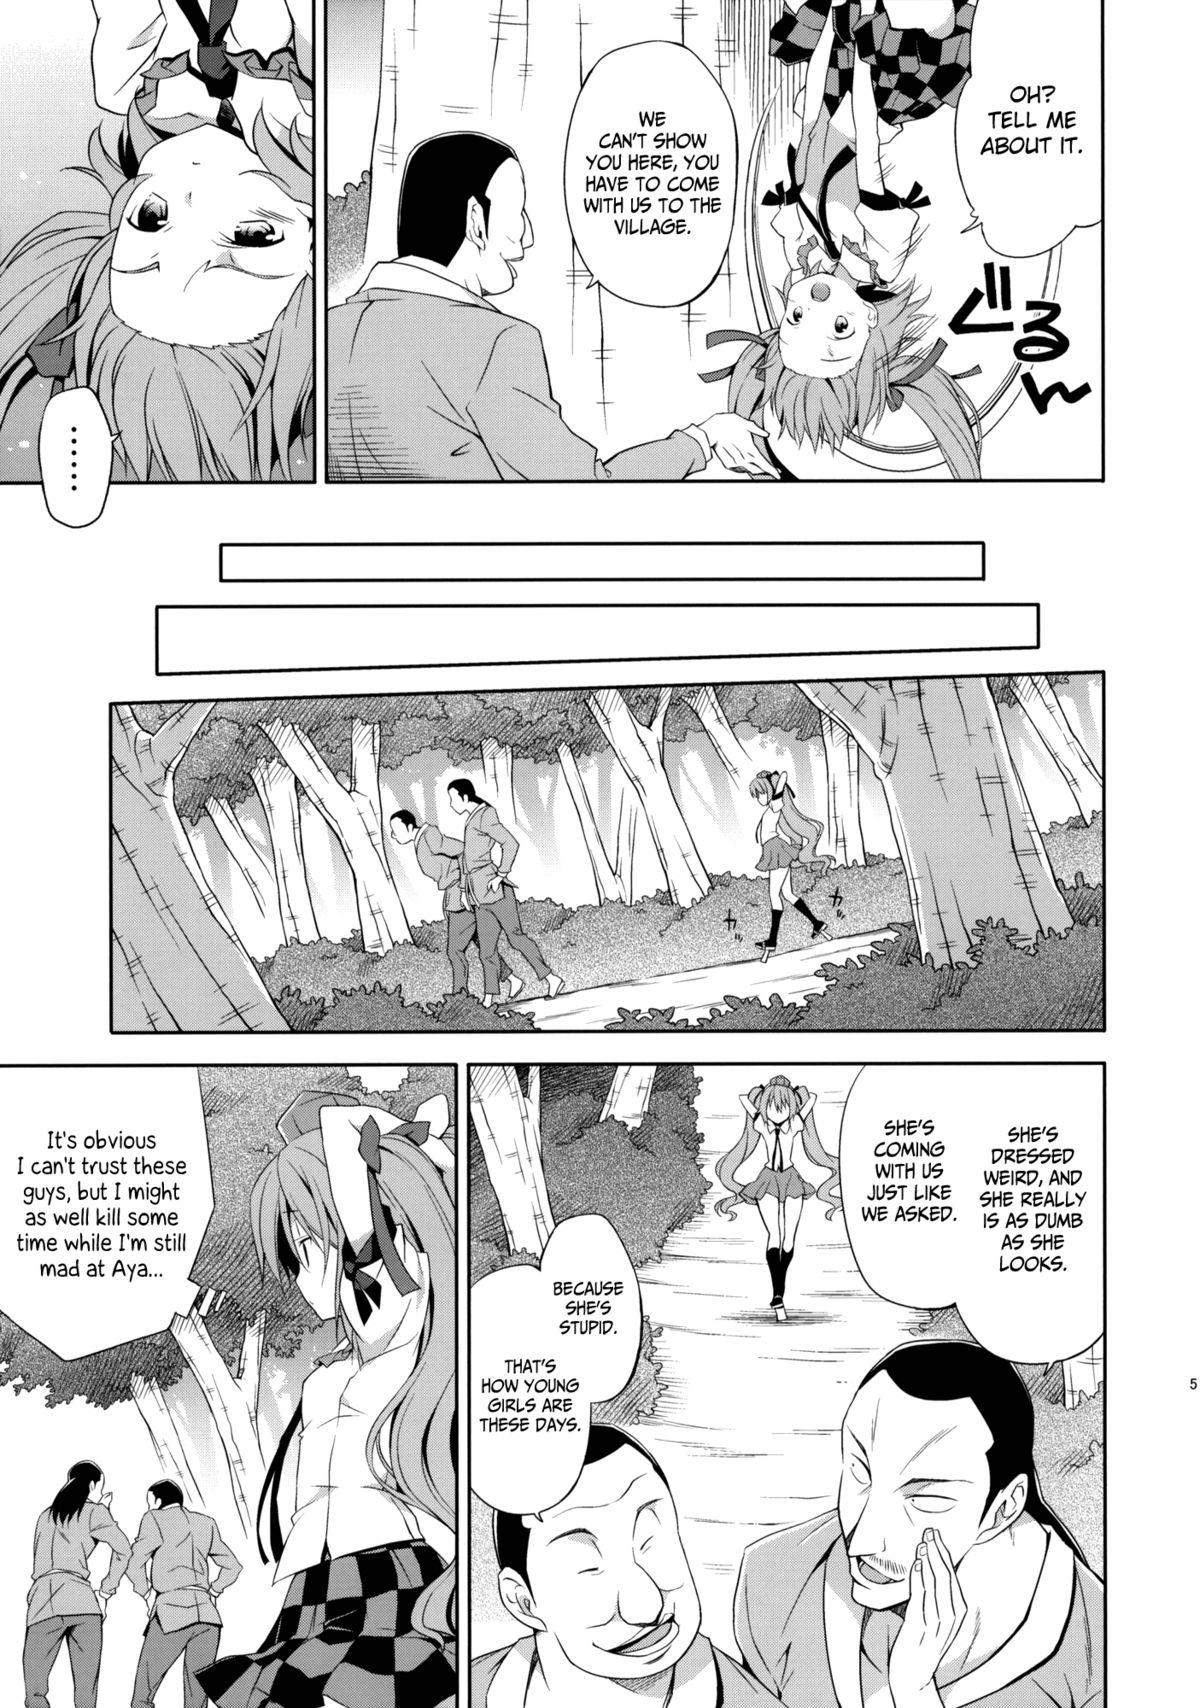 Mexico Hatate no Binwan Shuzairoku | Record of Hatate's Competent Fact-Finding - Touhou project Spanking - Page 4